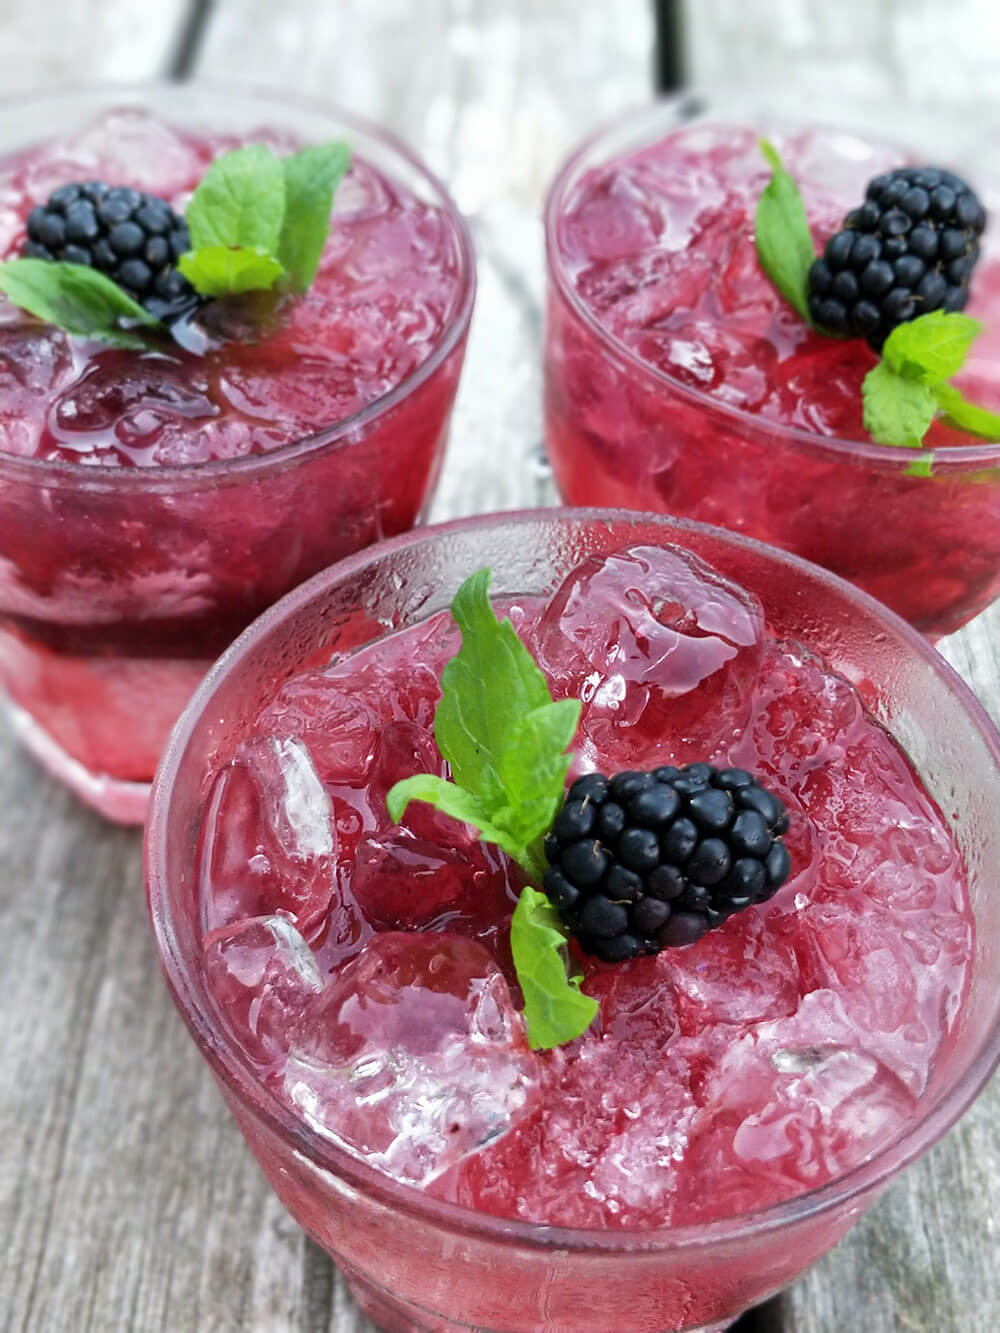 The Bramble Cocktail